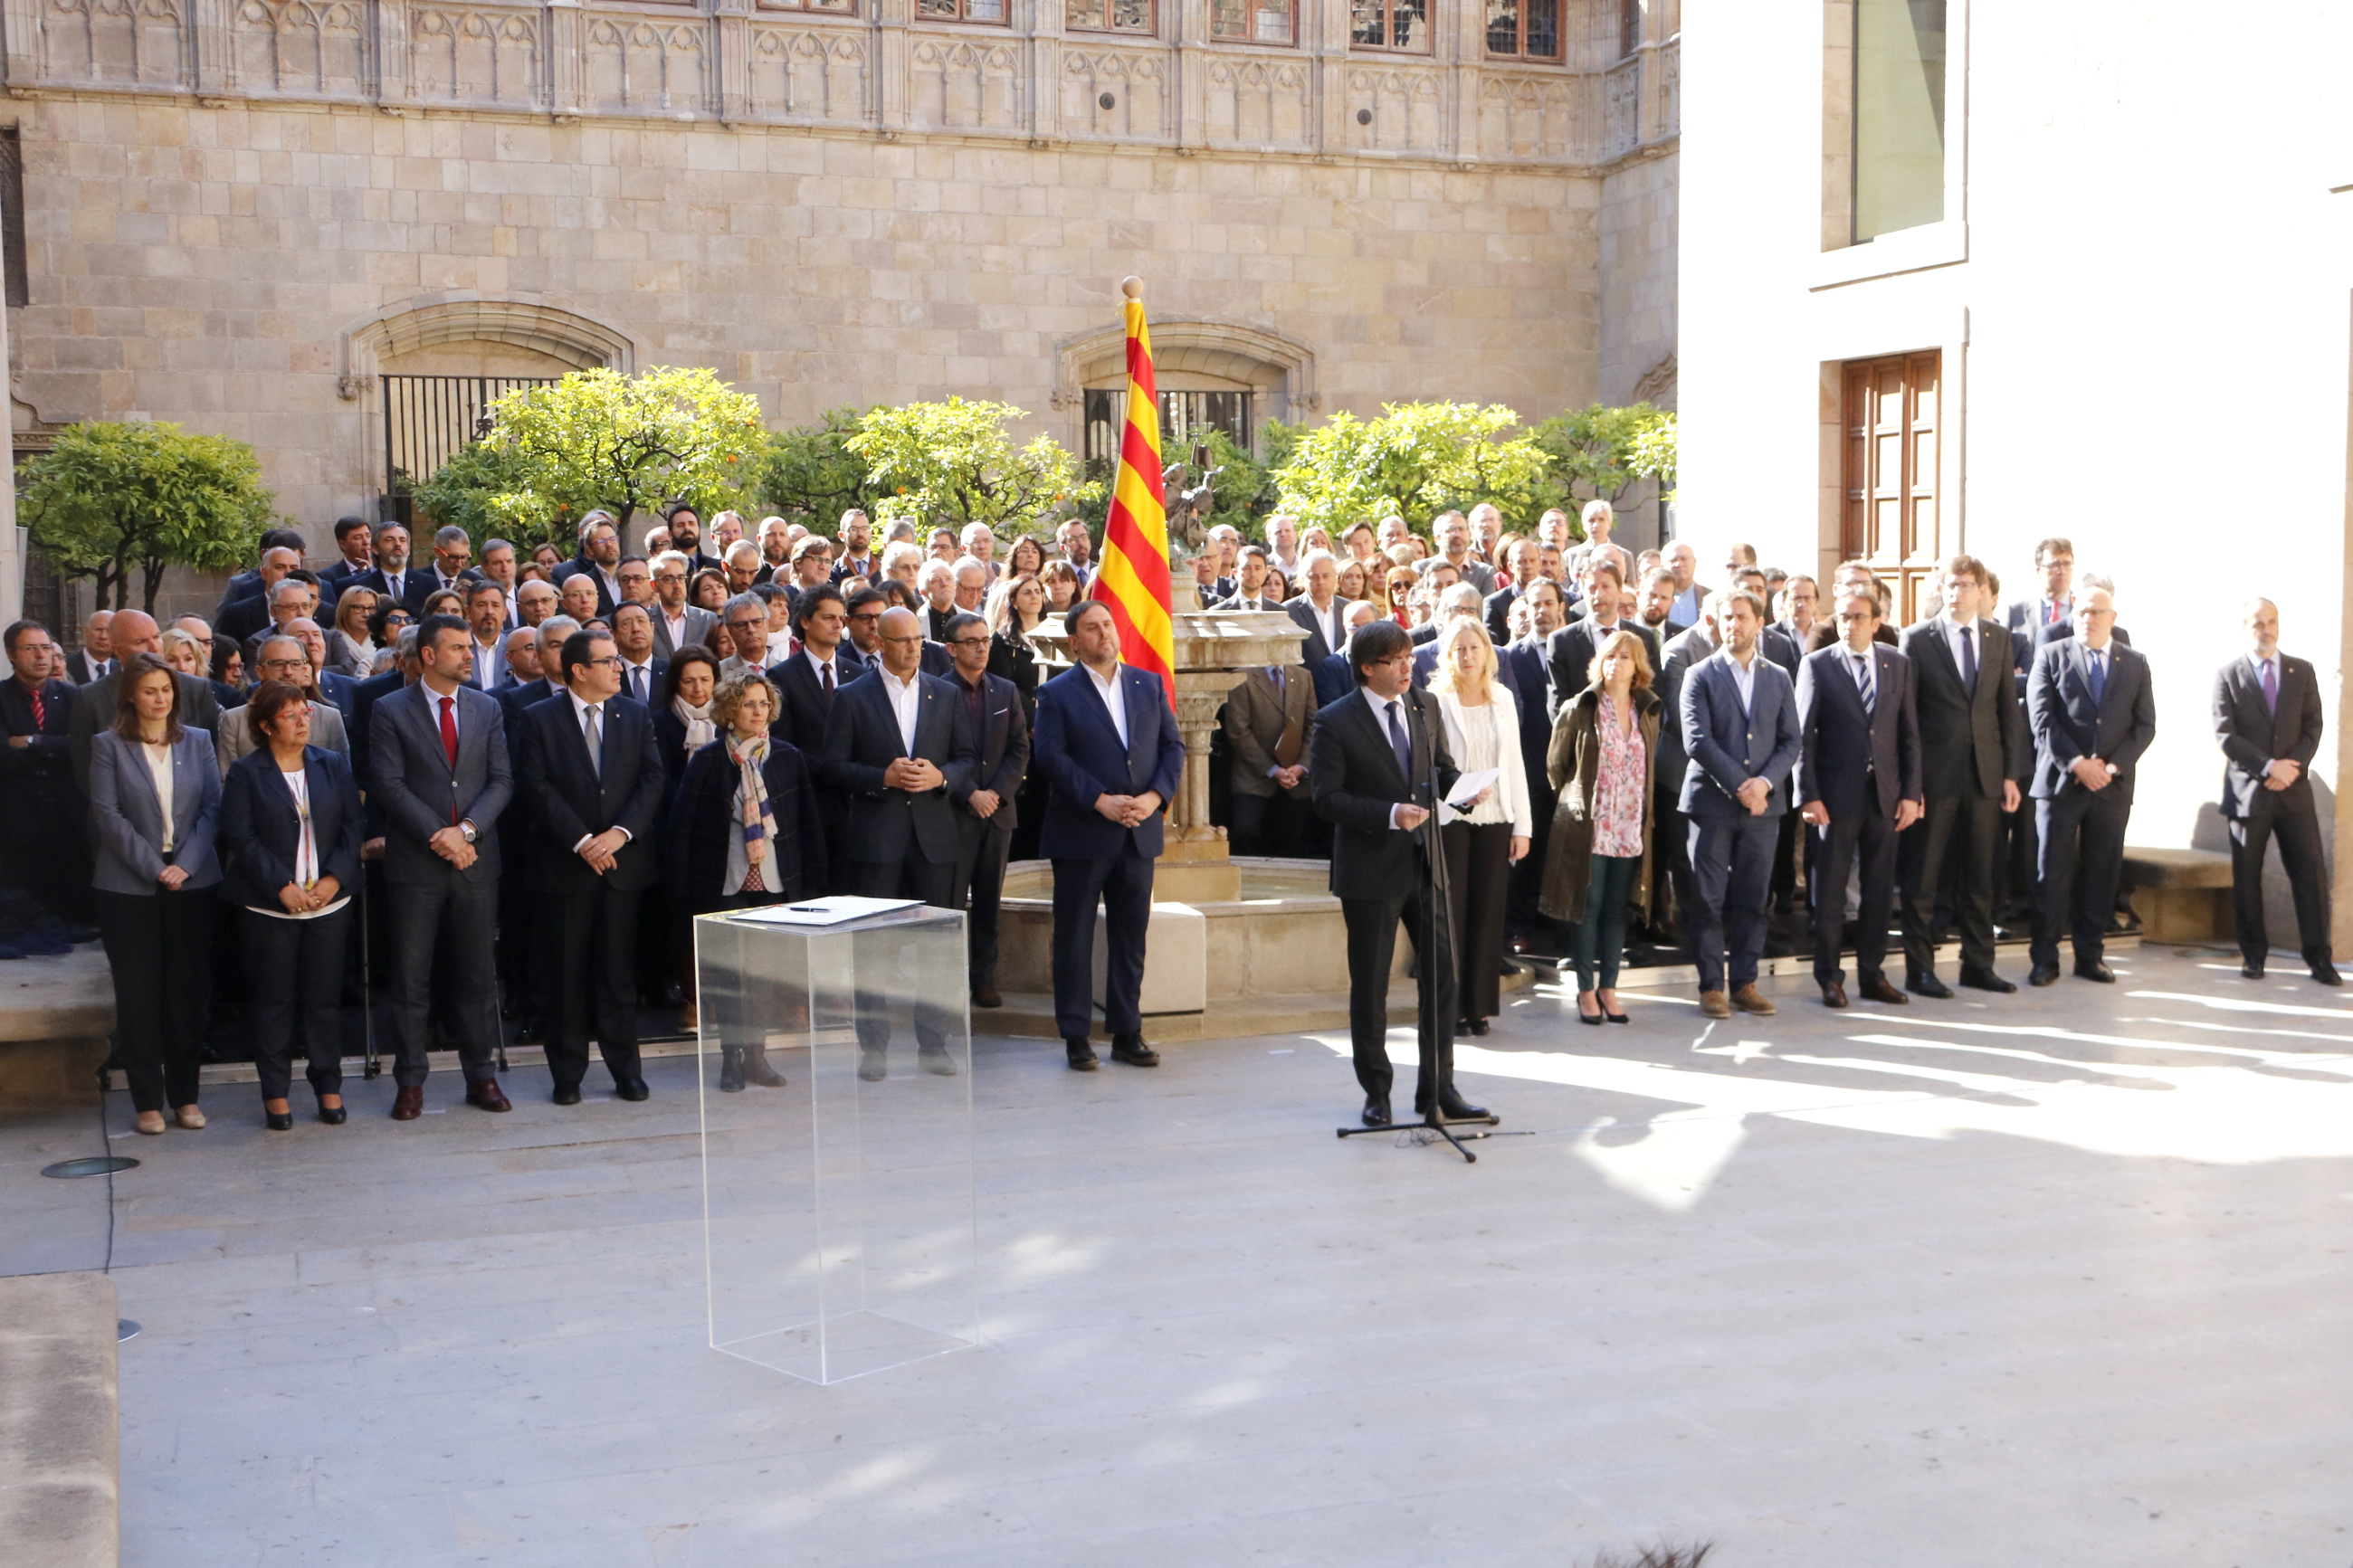 Catalan president, Carles Puigdemont, at the Government headquaters in Barcelona (by Rafa Garrido)